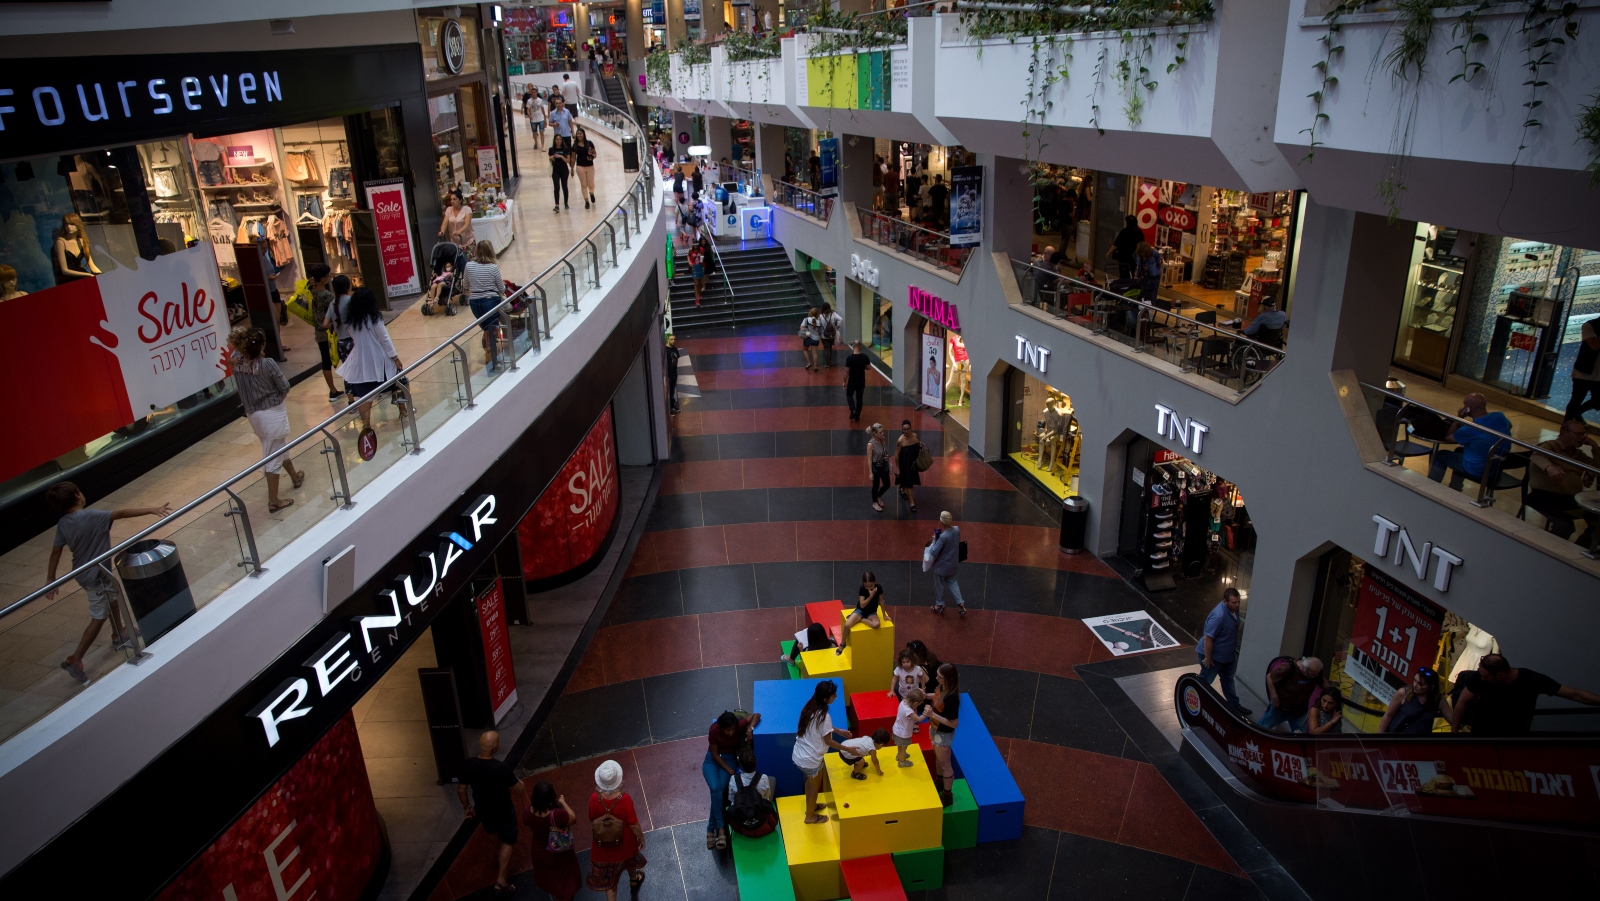 Tel Aviv’s Dizengoff Center mall is one of the indoor locations in which the Navin app can help visitors navigate. Photo by Miriam Alster/FLASH90